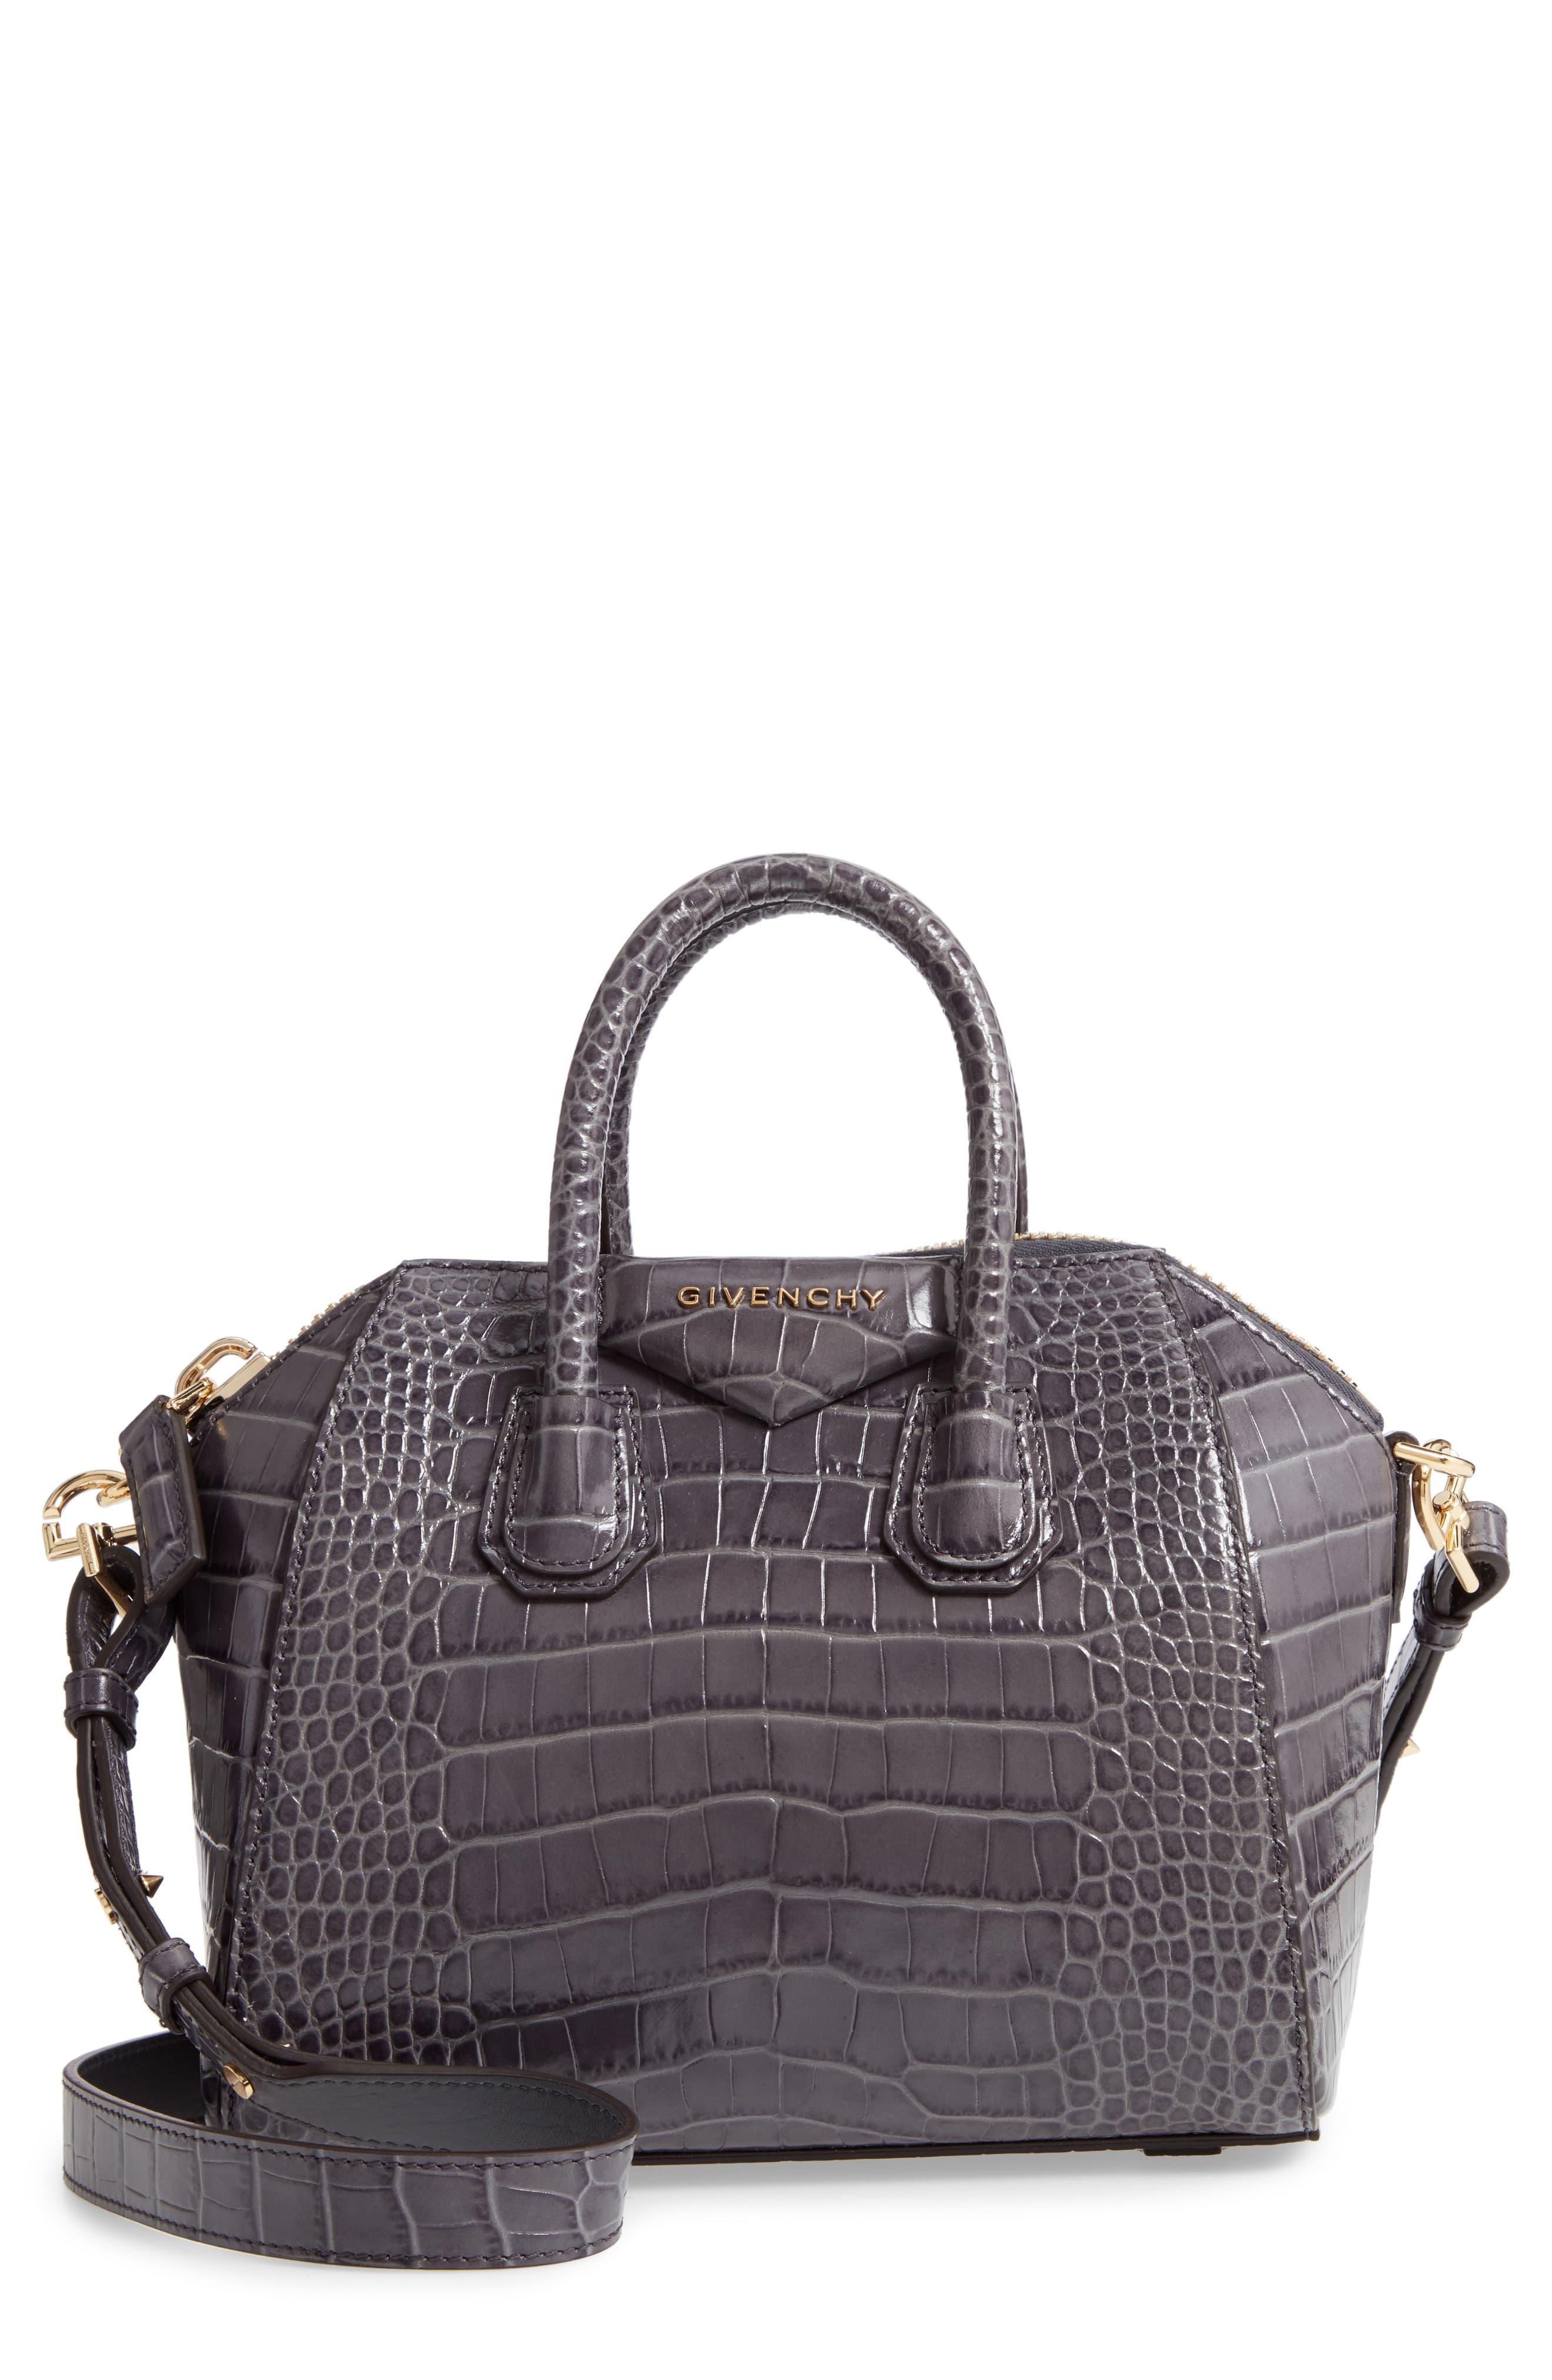 Givenchy Antigona Mini Croc-effect Leather Tote in Grey (Gray) - Save 15% - Lyst